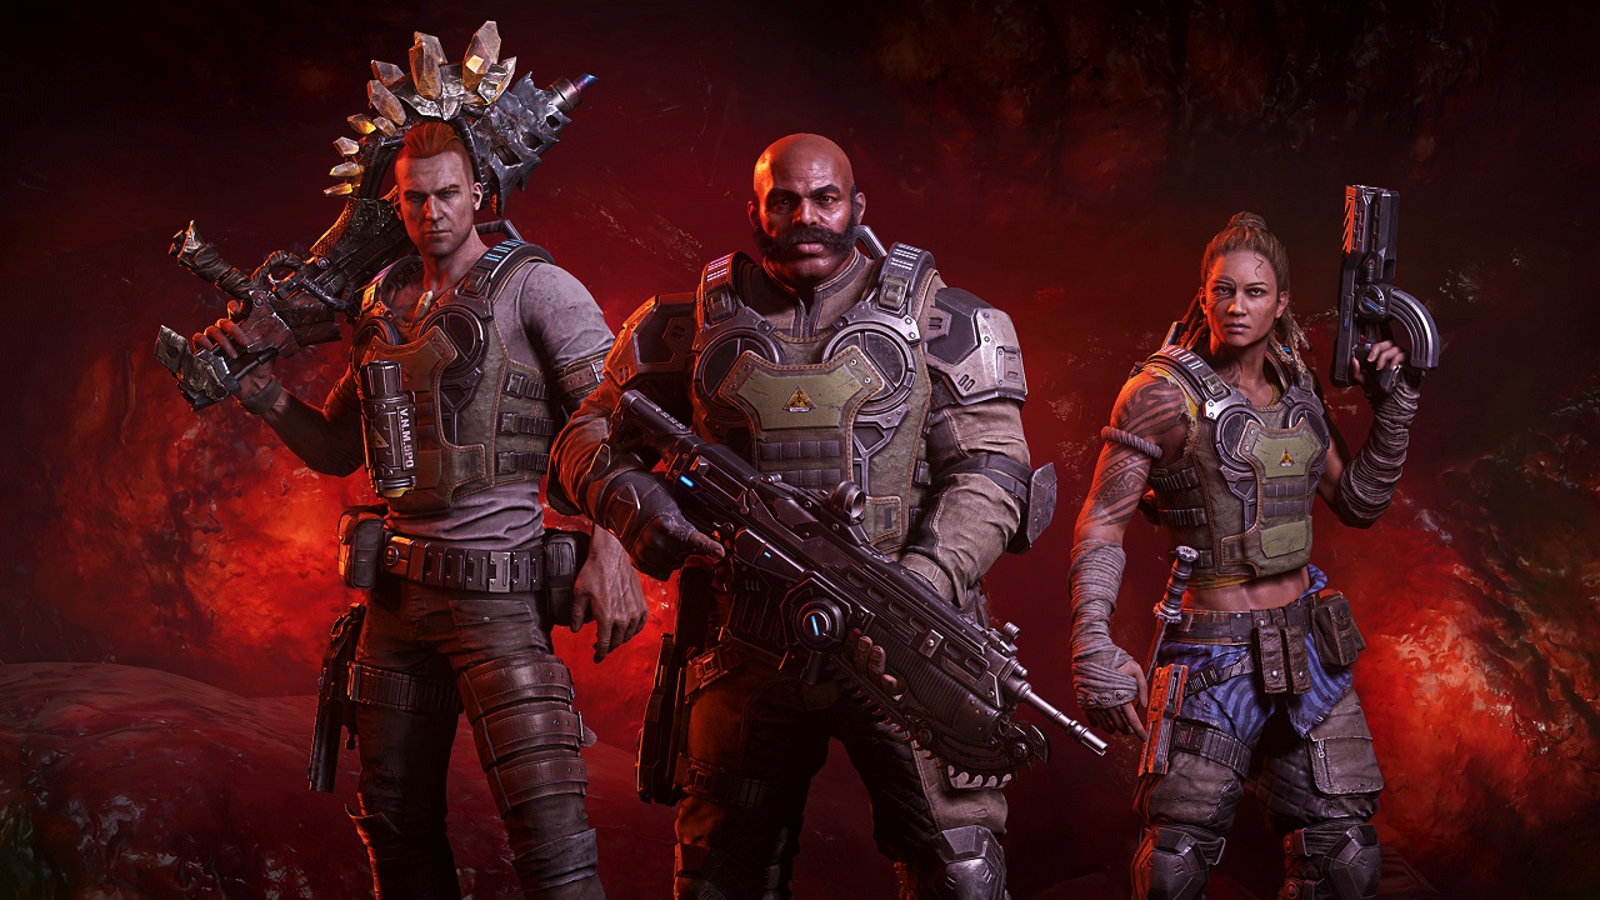 Gears 5 DLC Campaign: Hivebusters, Release Date and more!